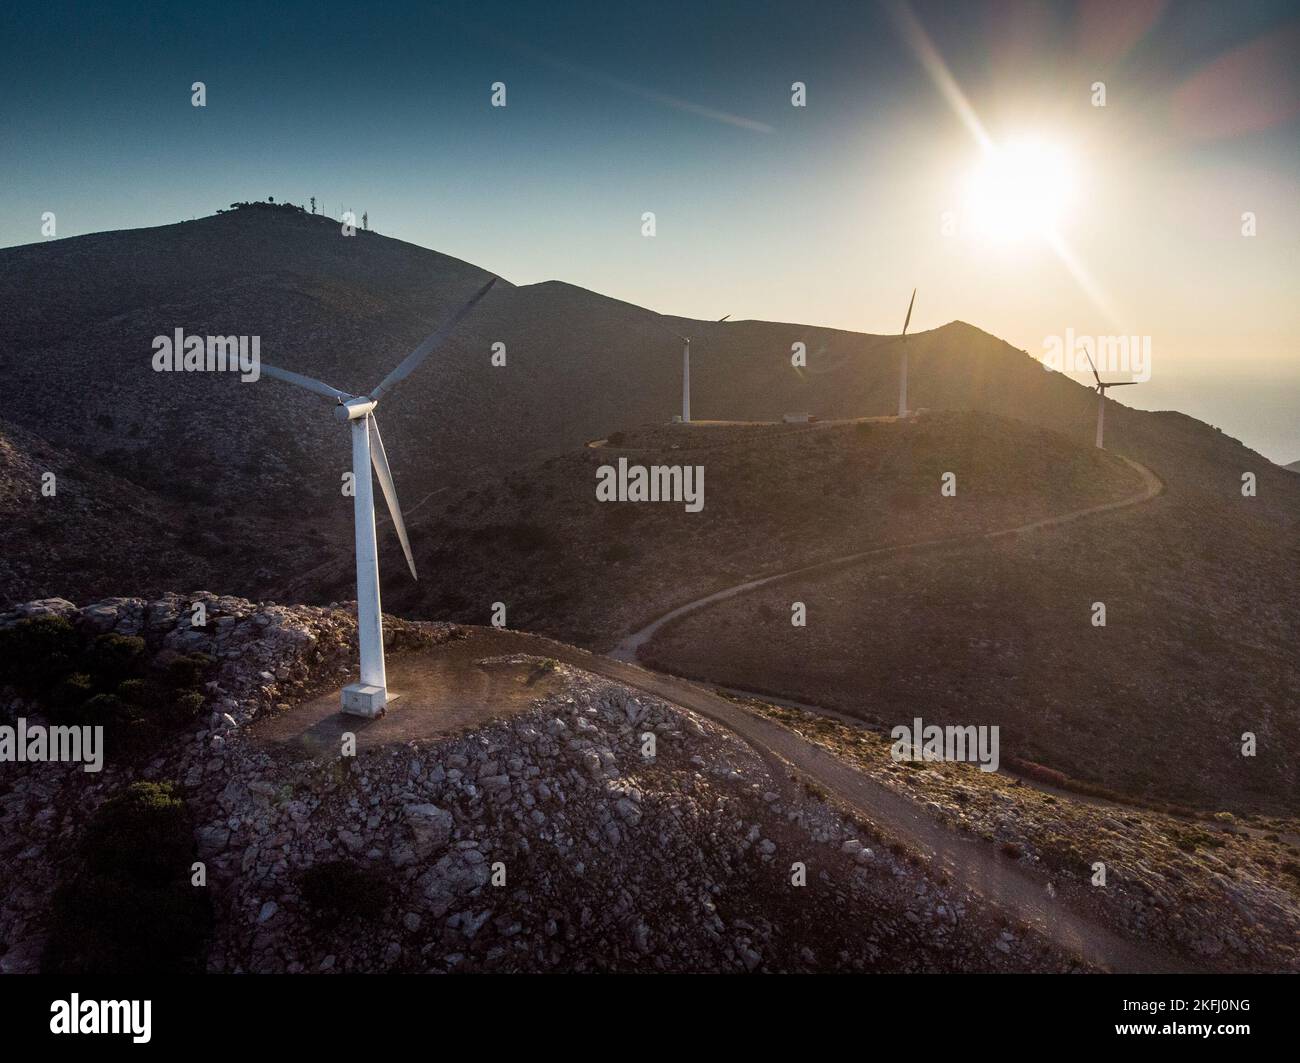 Wind turbines on landscape and Idyllic shot of silhouette mountain range against bright sun in sky during sunset Stock Photo